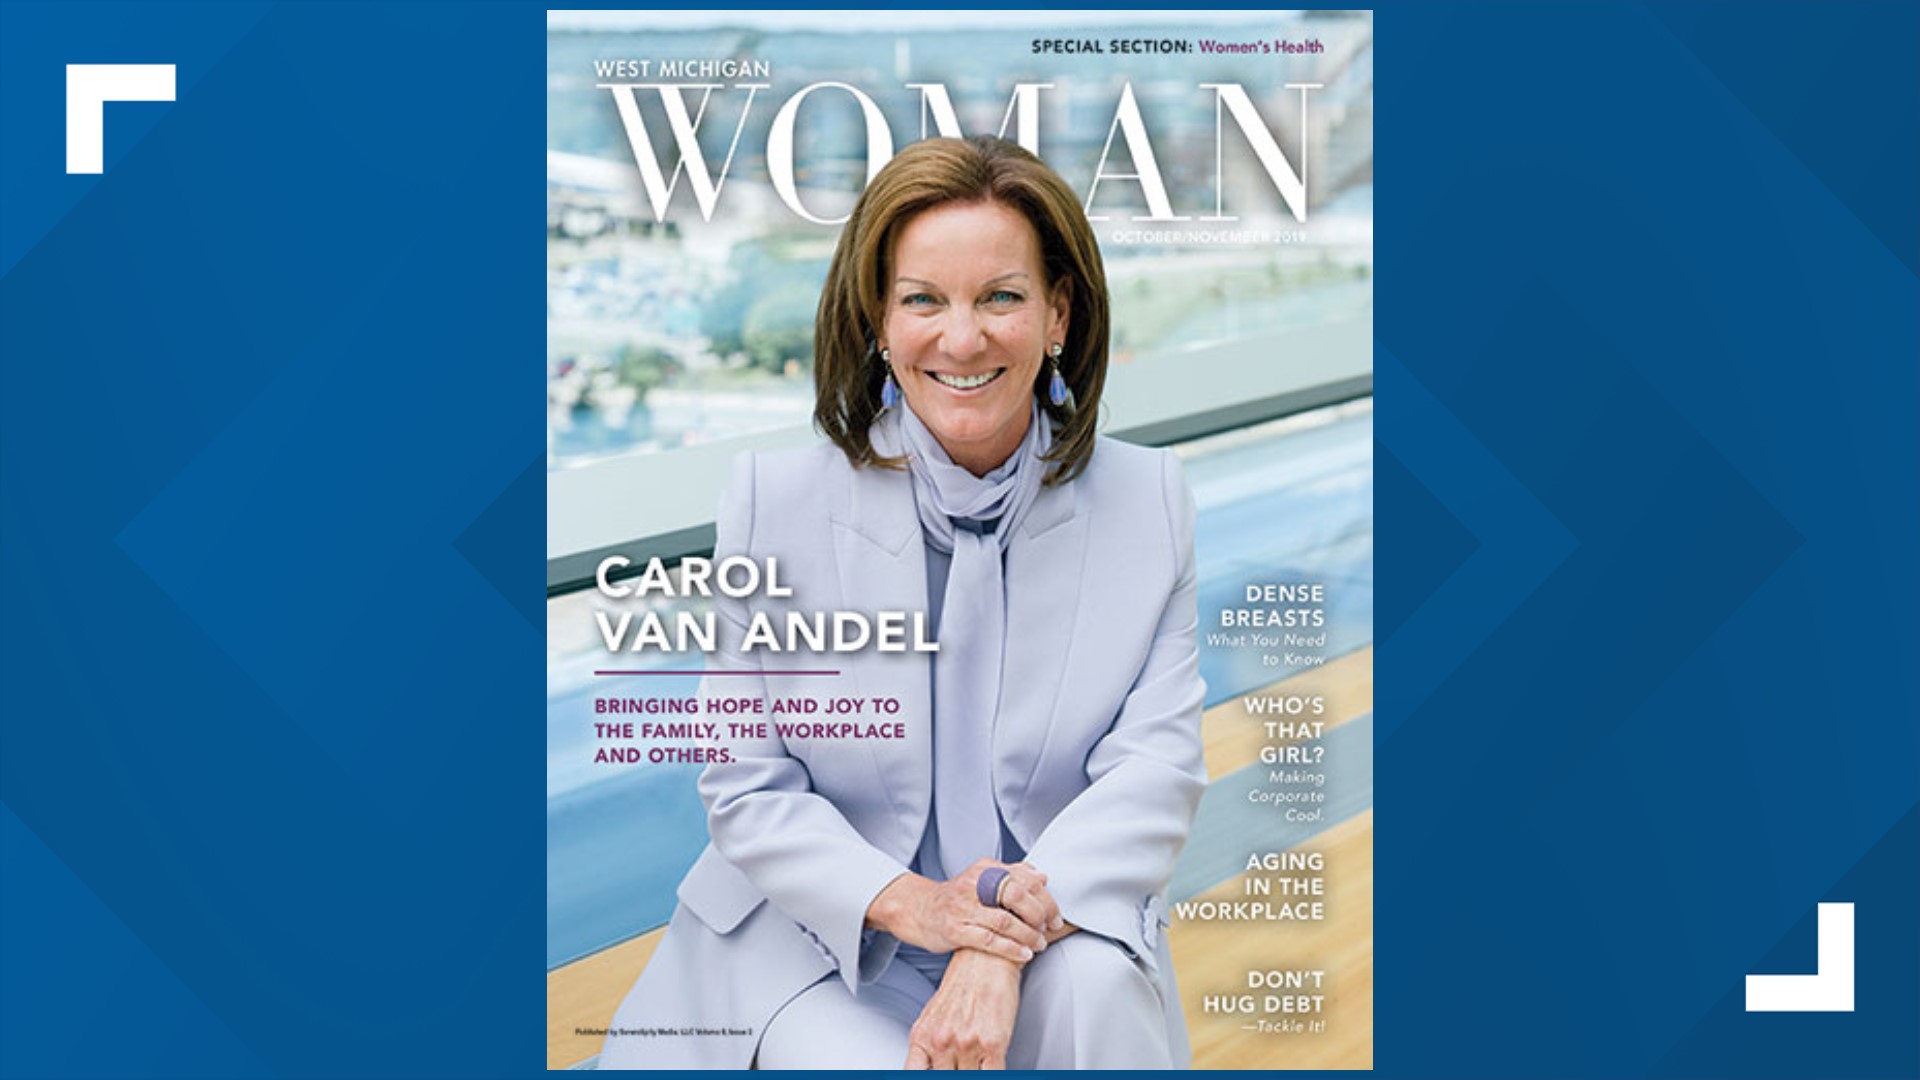 Another new month means another new issue for West Michigan Woman Magazine.